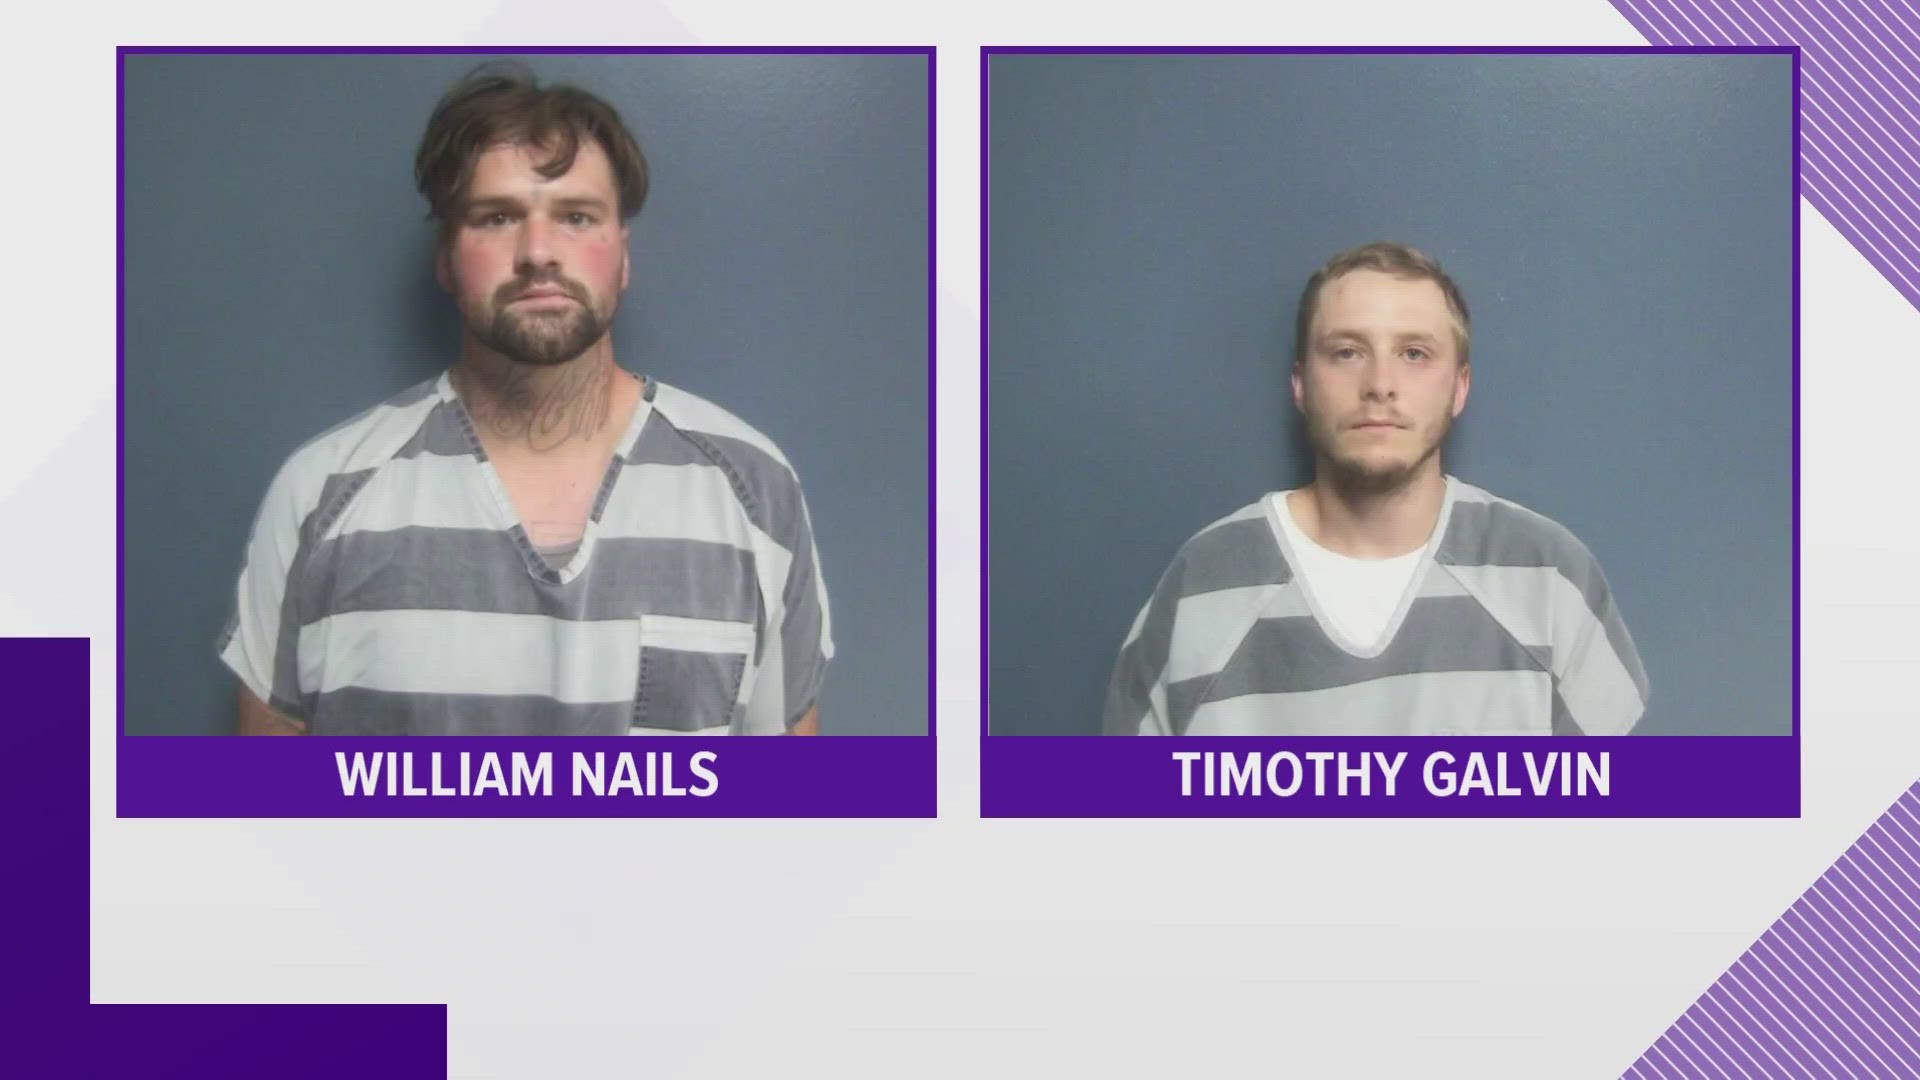 William Nails was charged with attempted first-degree murder and Timothy Galvin was charged with accessory to attempted first-degree murder, according to police.